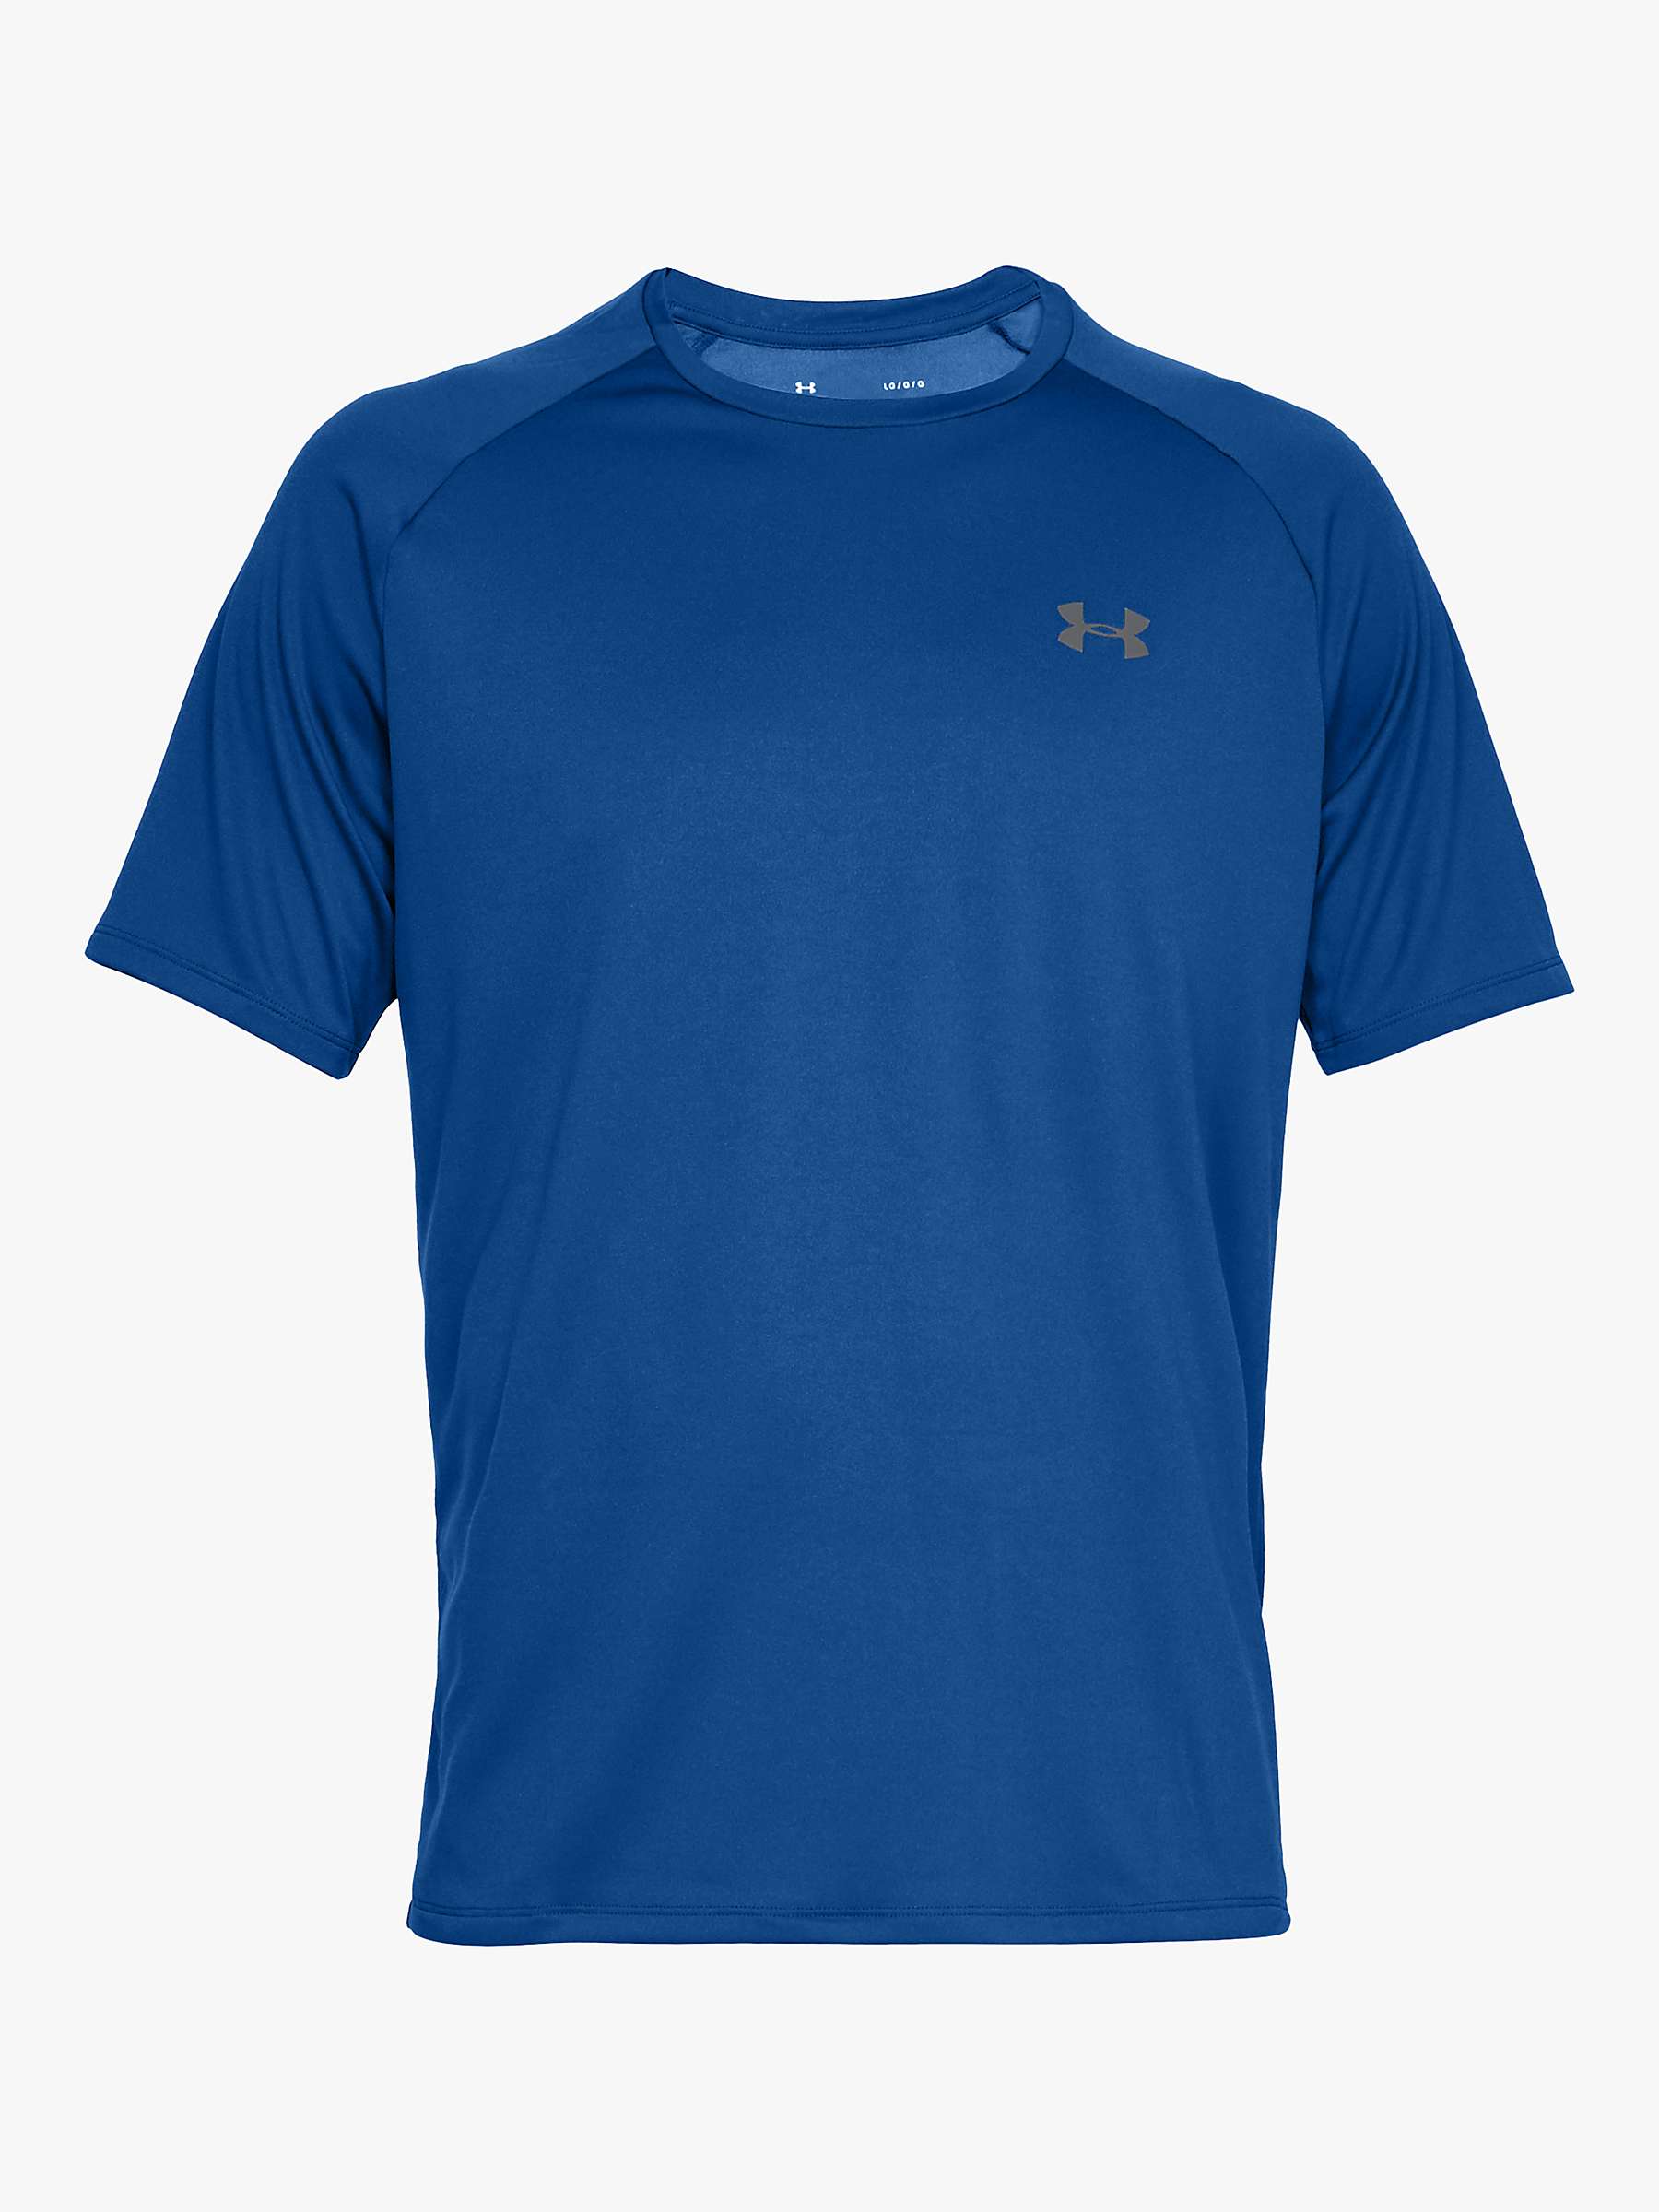 Buy Under Armour Tech 2.0 Short Sleeve Gym Top Online at johnlewis.com